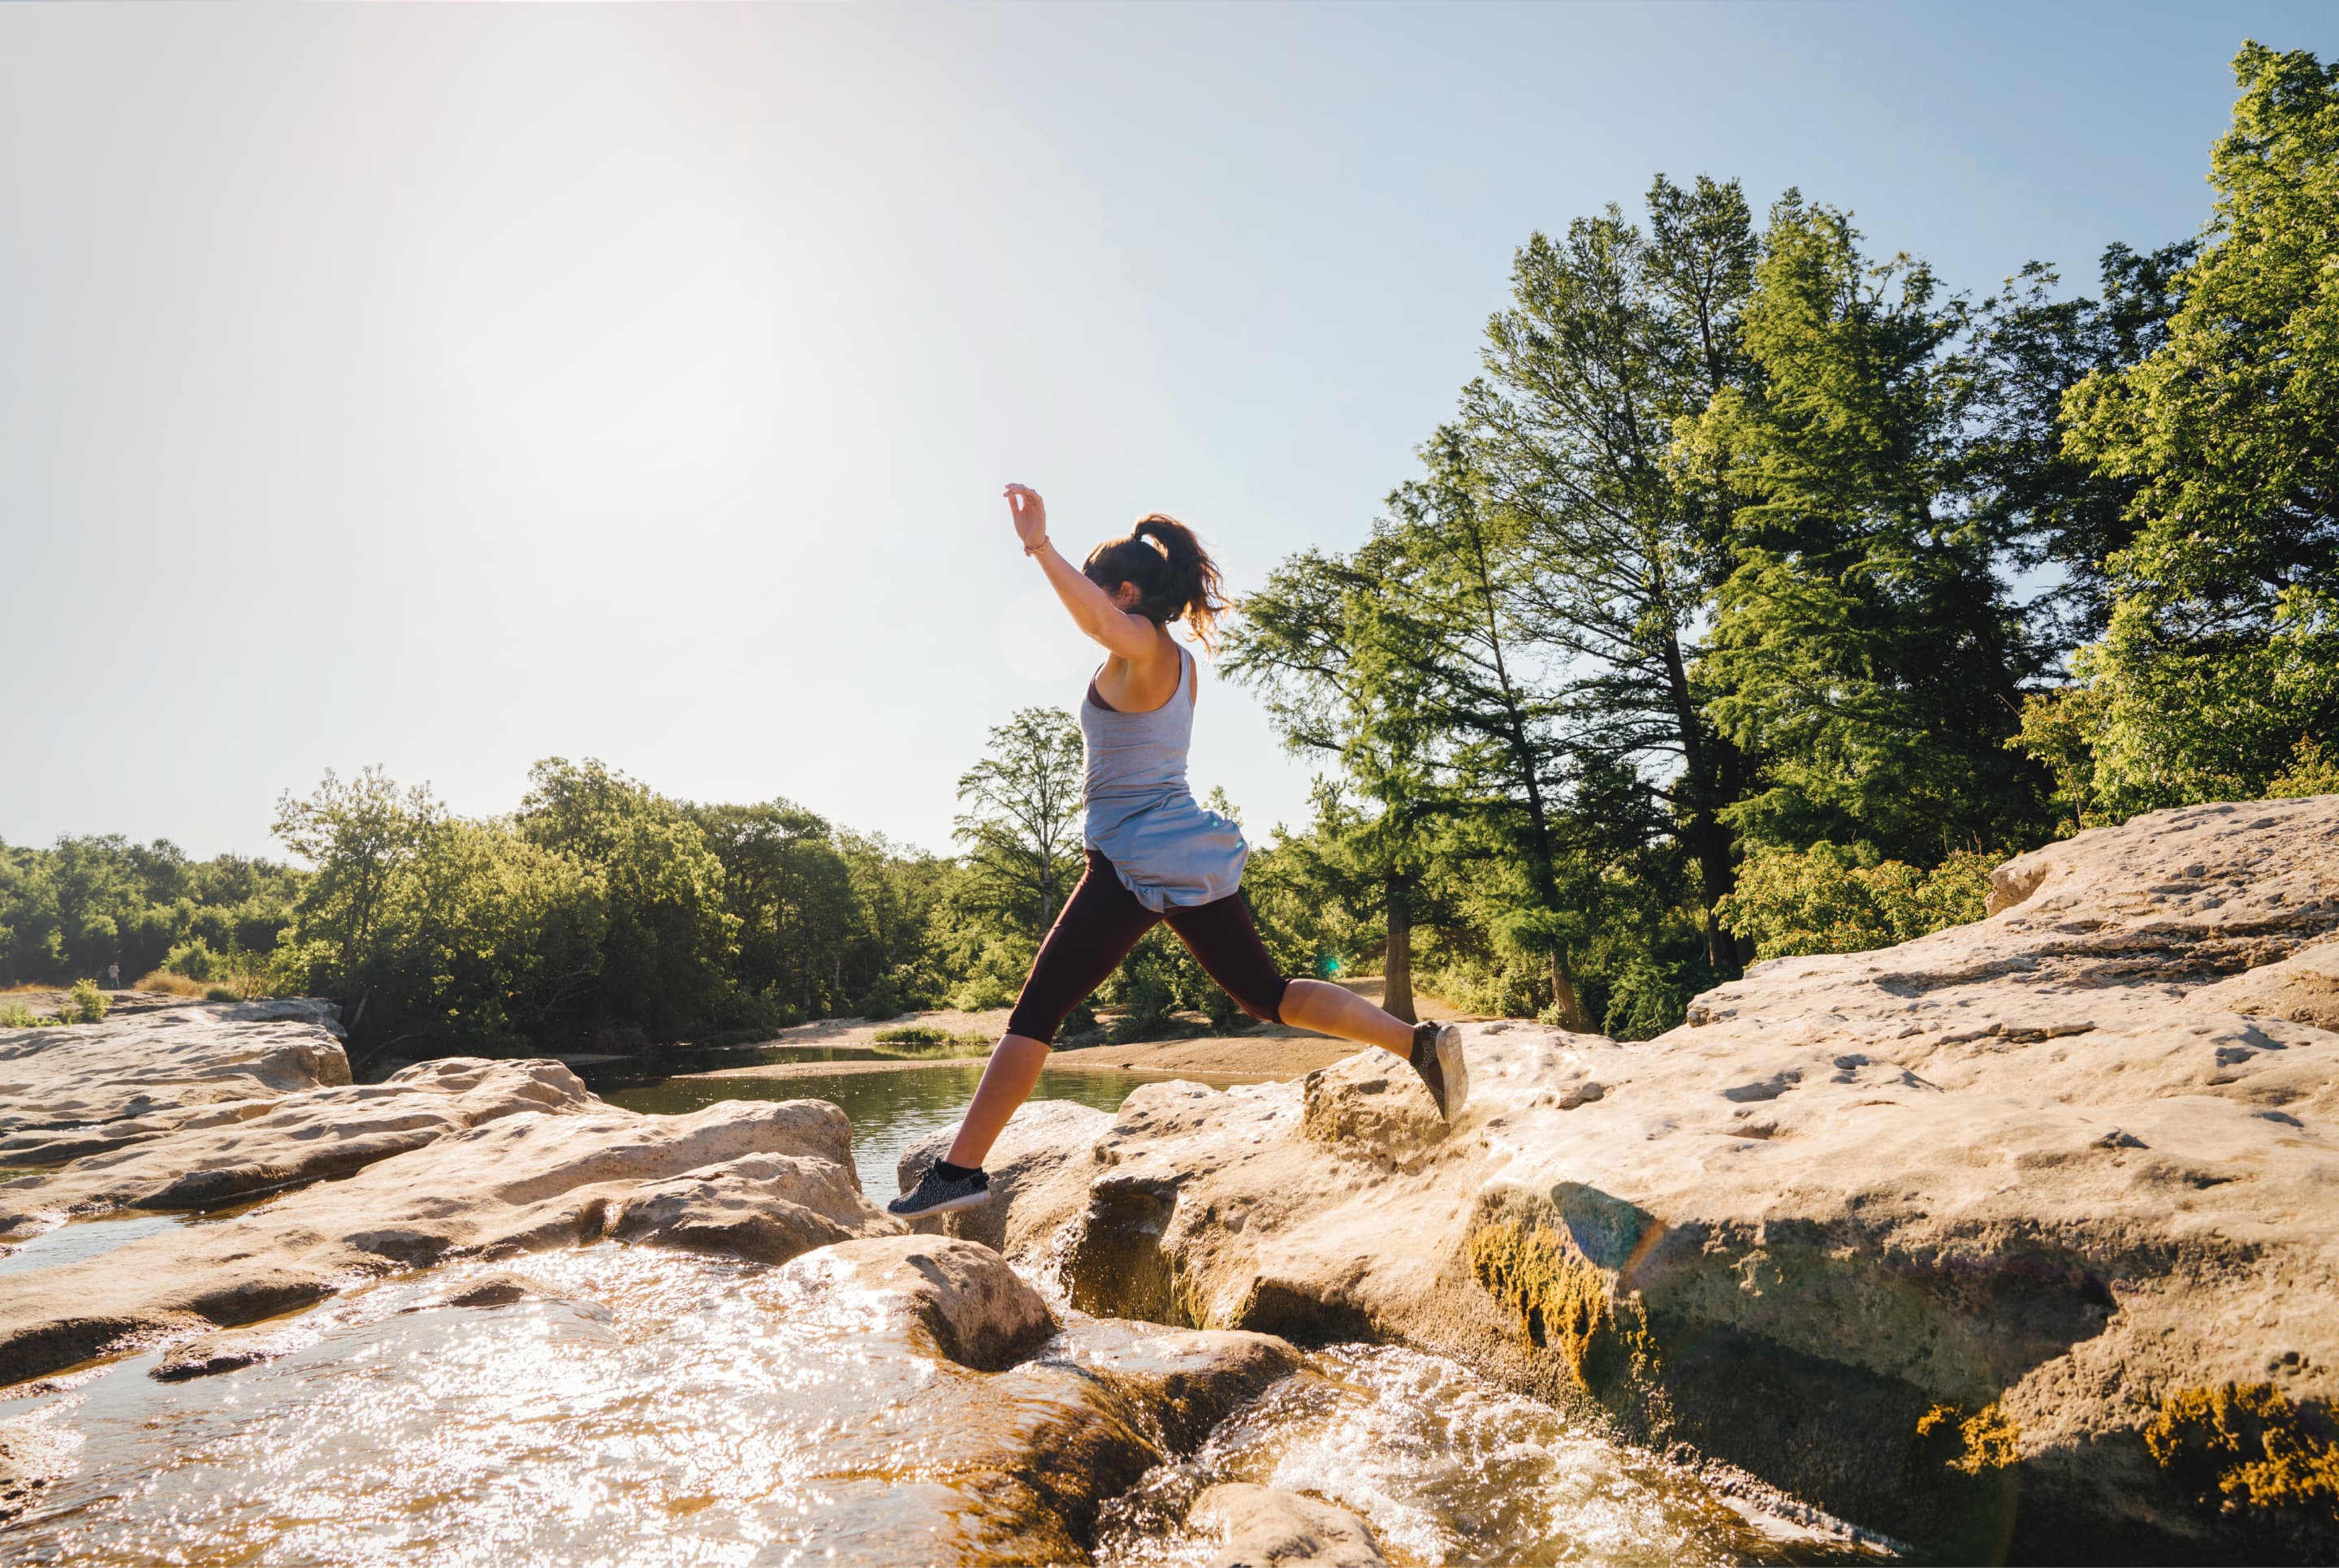 A trail runner hops joyfully along boulders surrounding a woodland stream. The sun-kissed water glistens, and the treetops glow vibrantly under a clear blue sky.